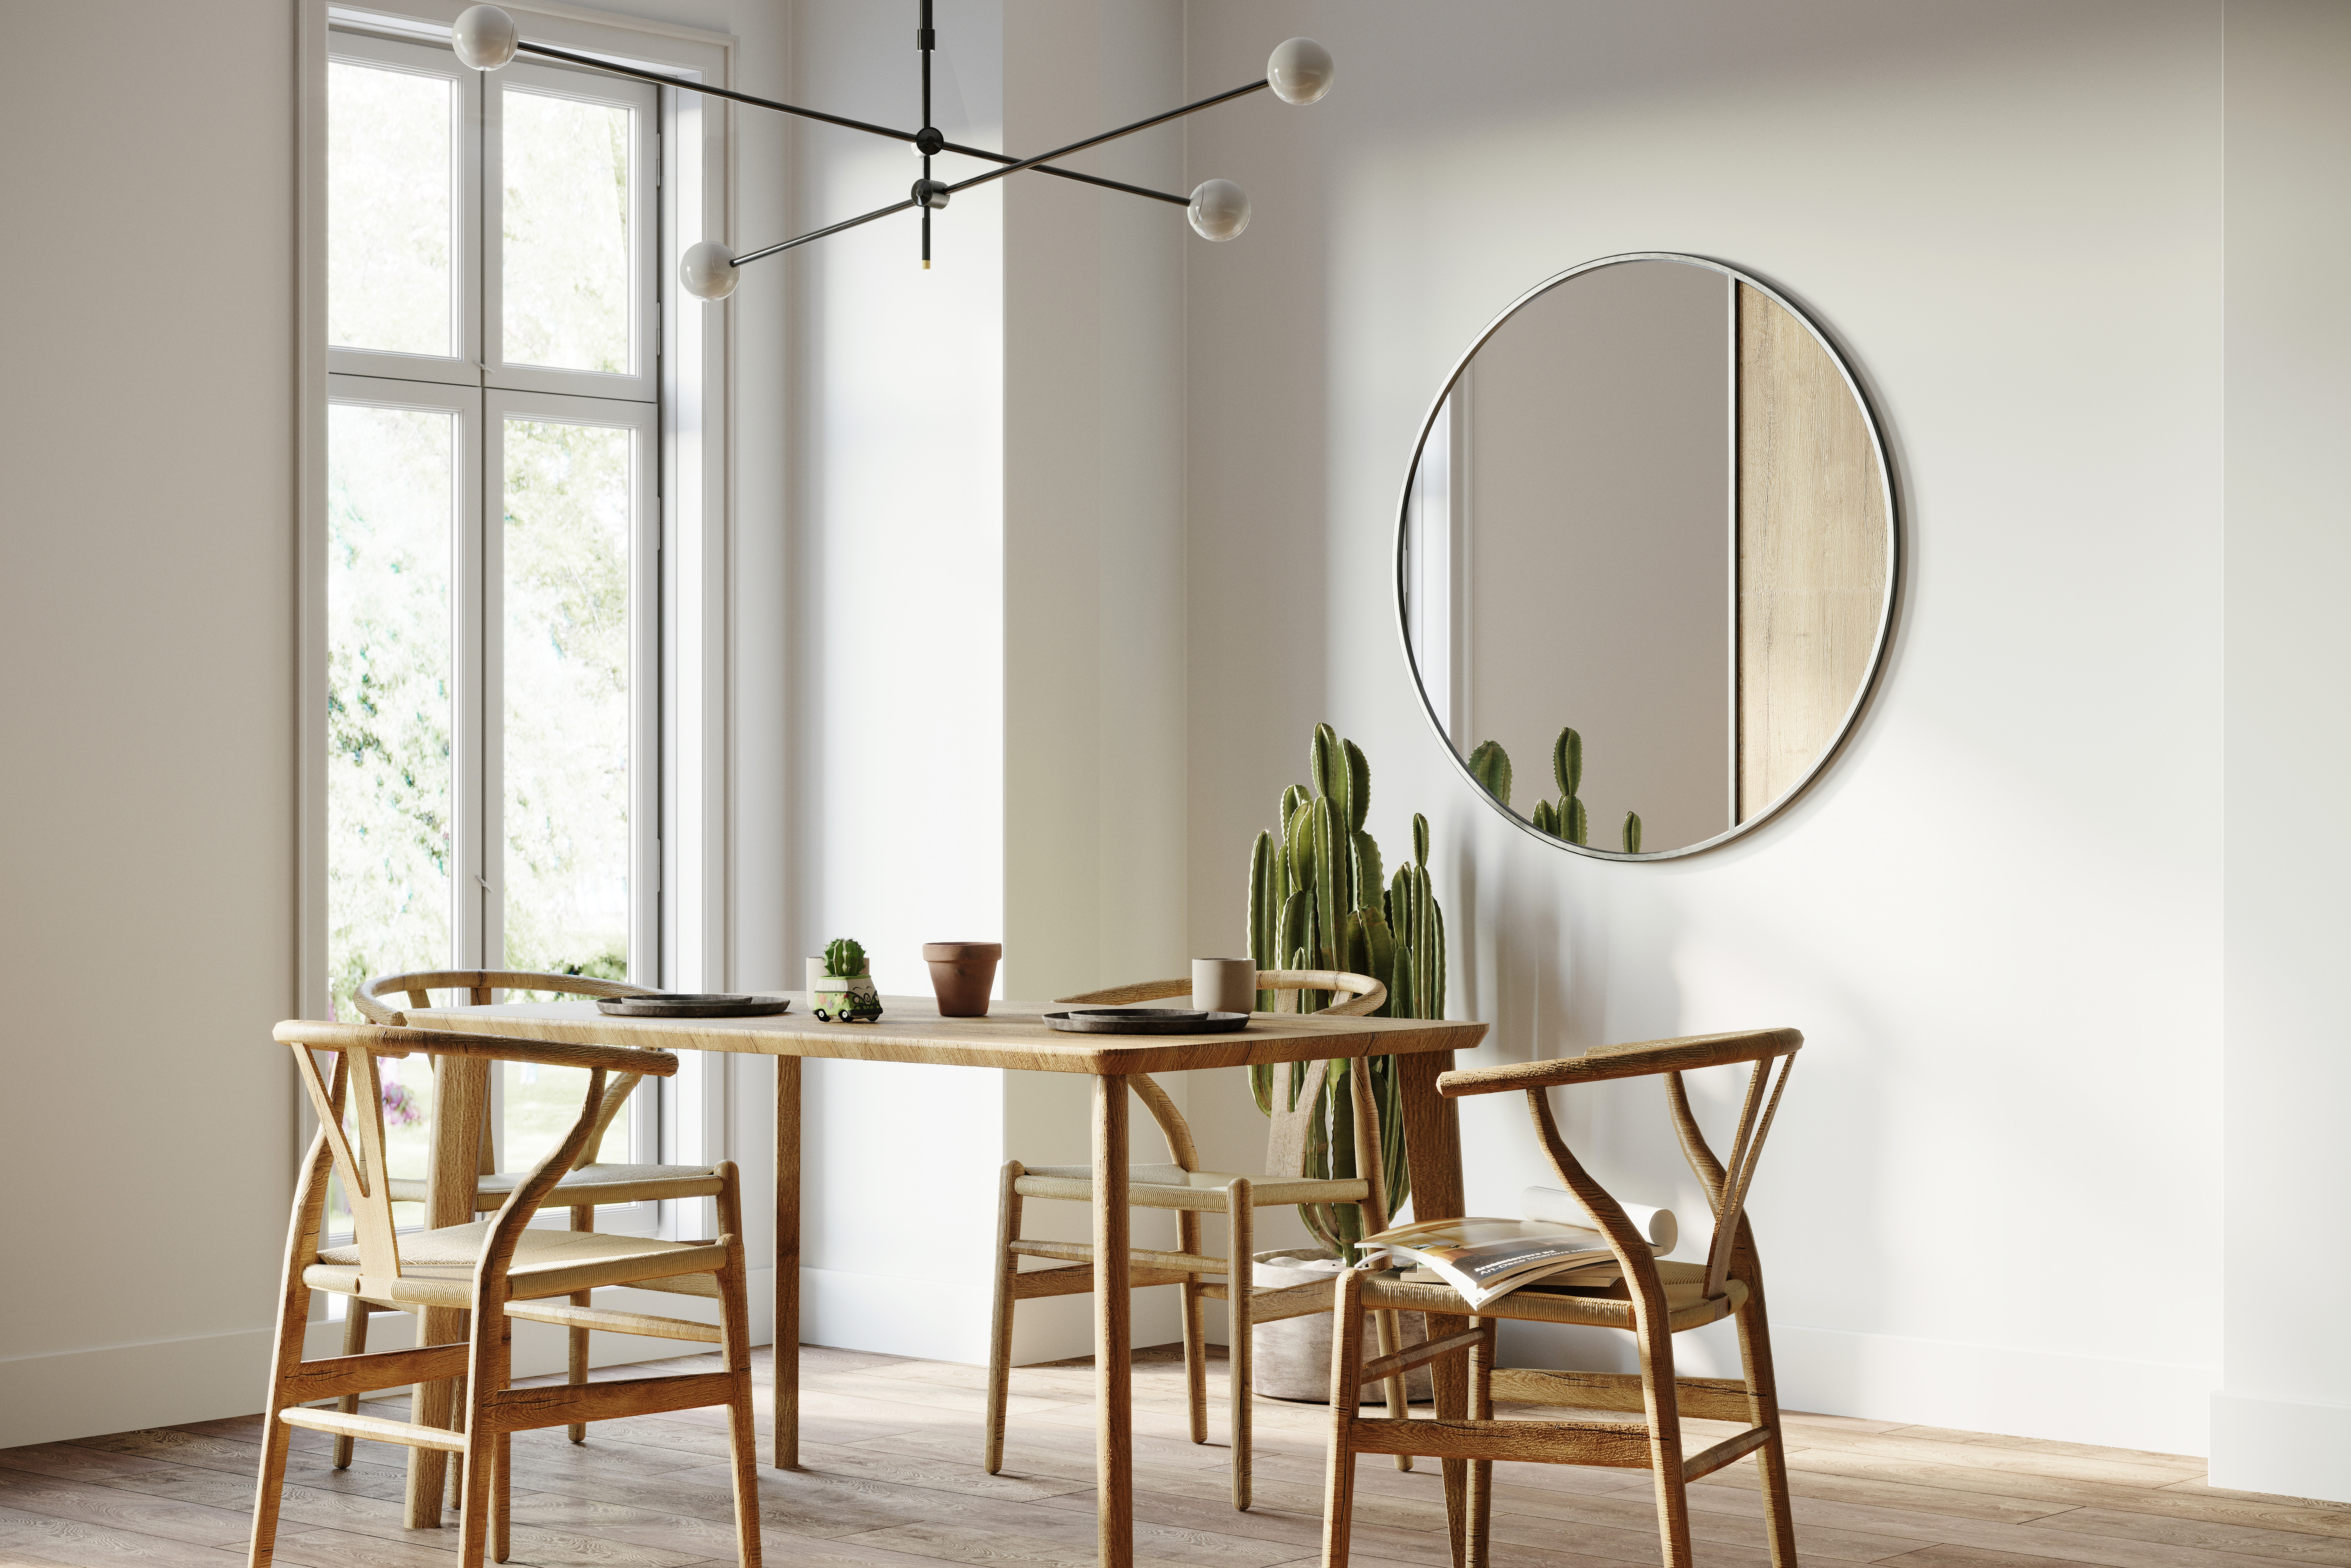 A modern dining room with walls painted in white, styled with a minimalist dining table and chairs set, a round mirror, and a simple light fixture